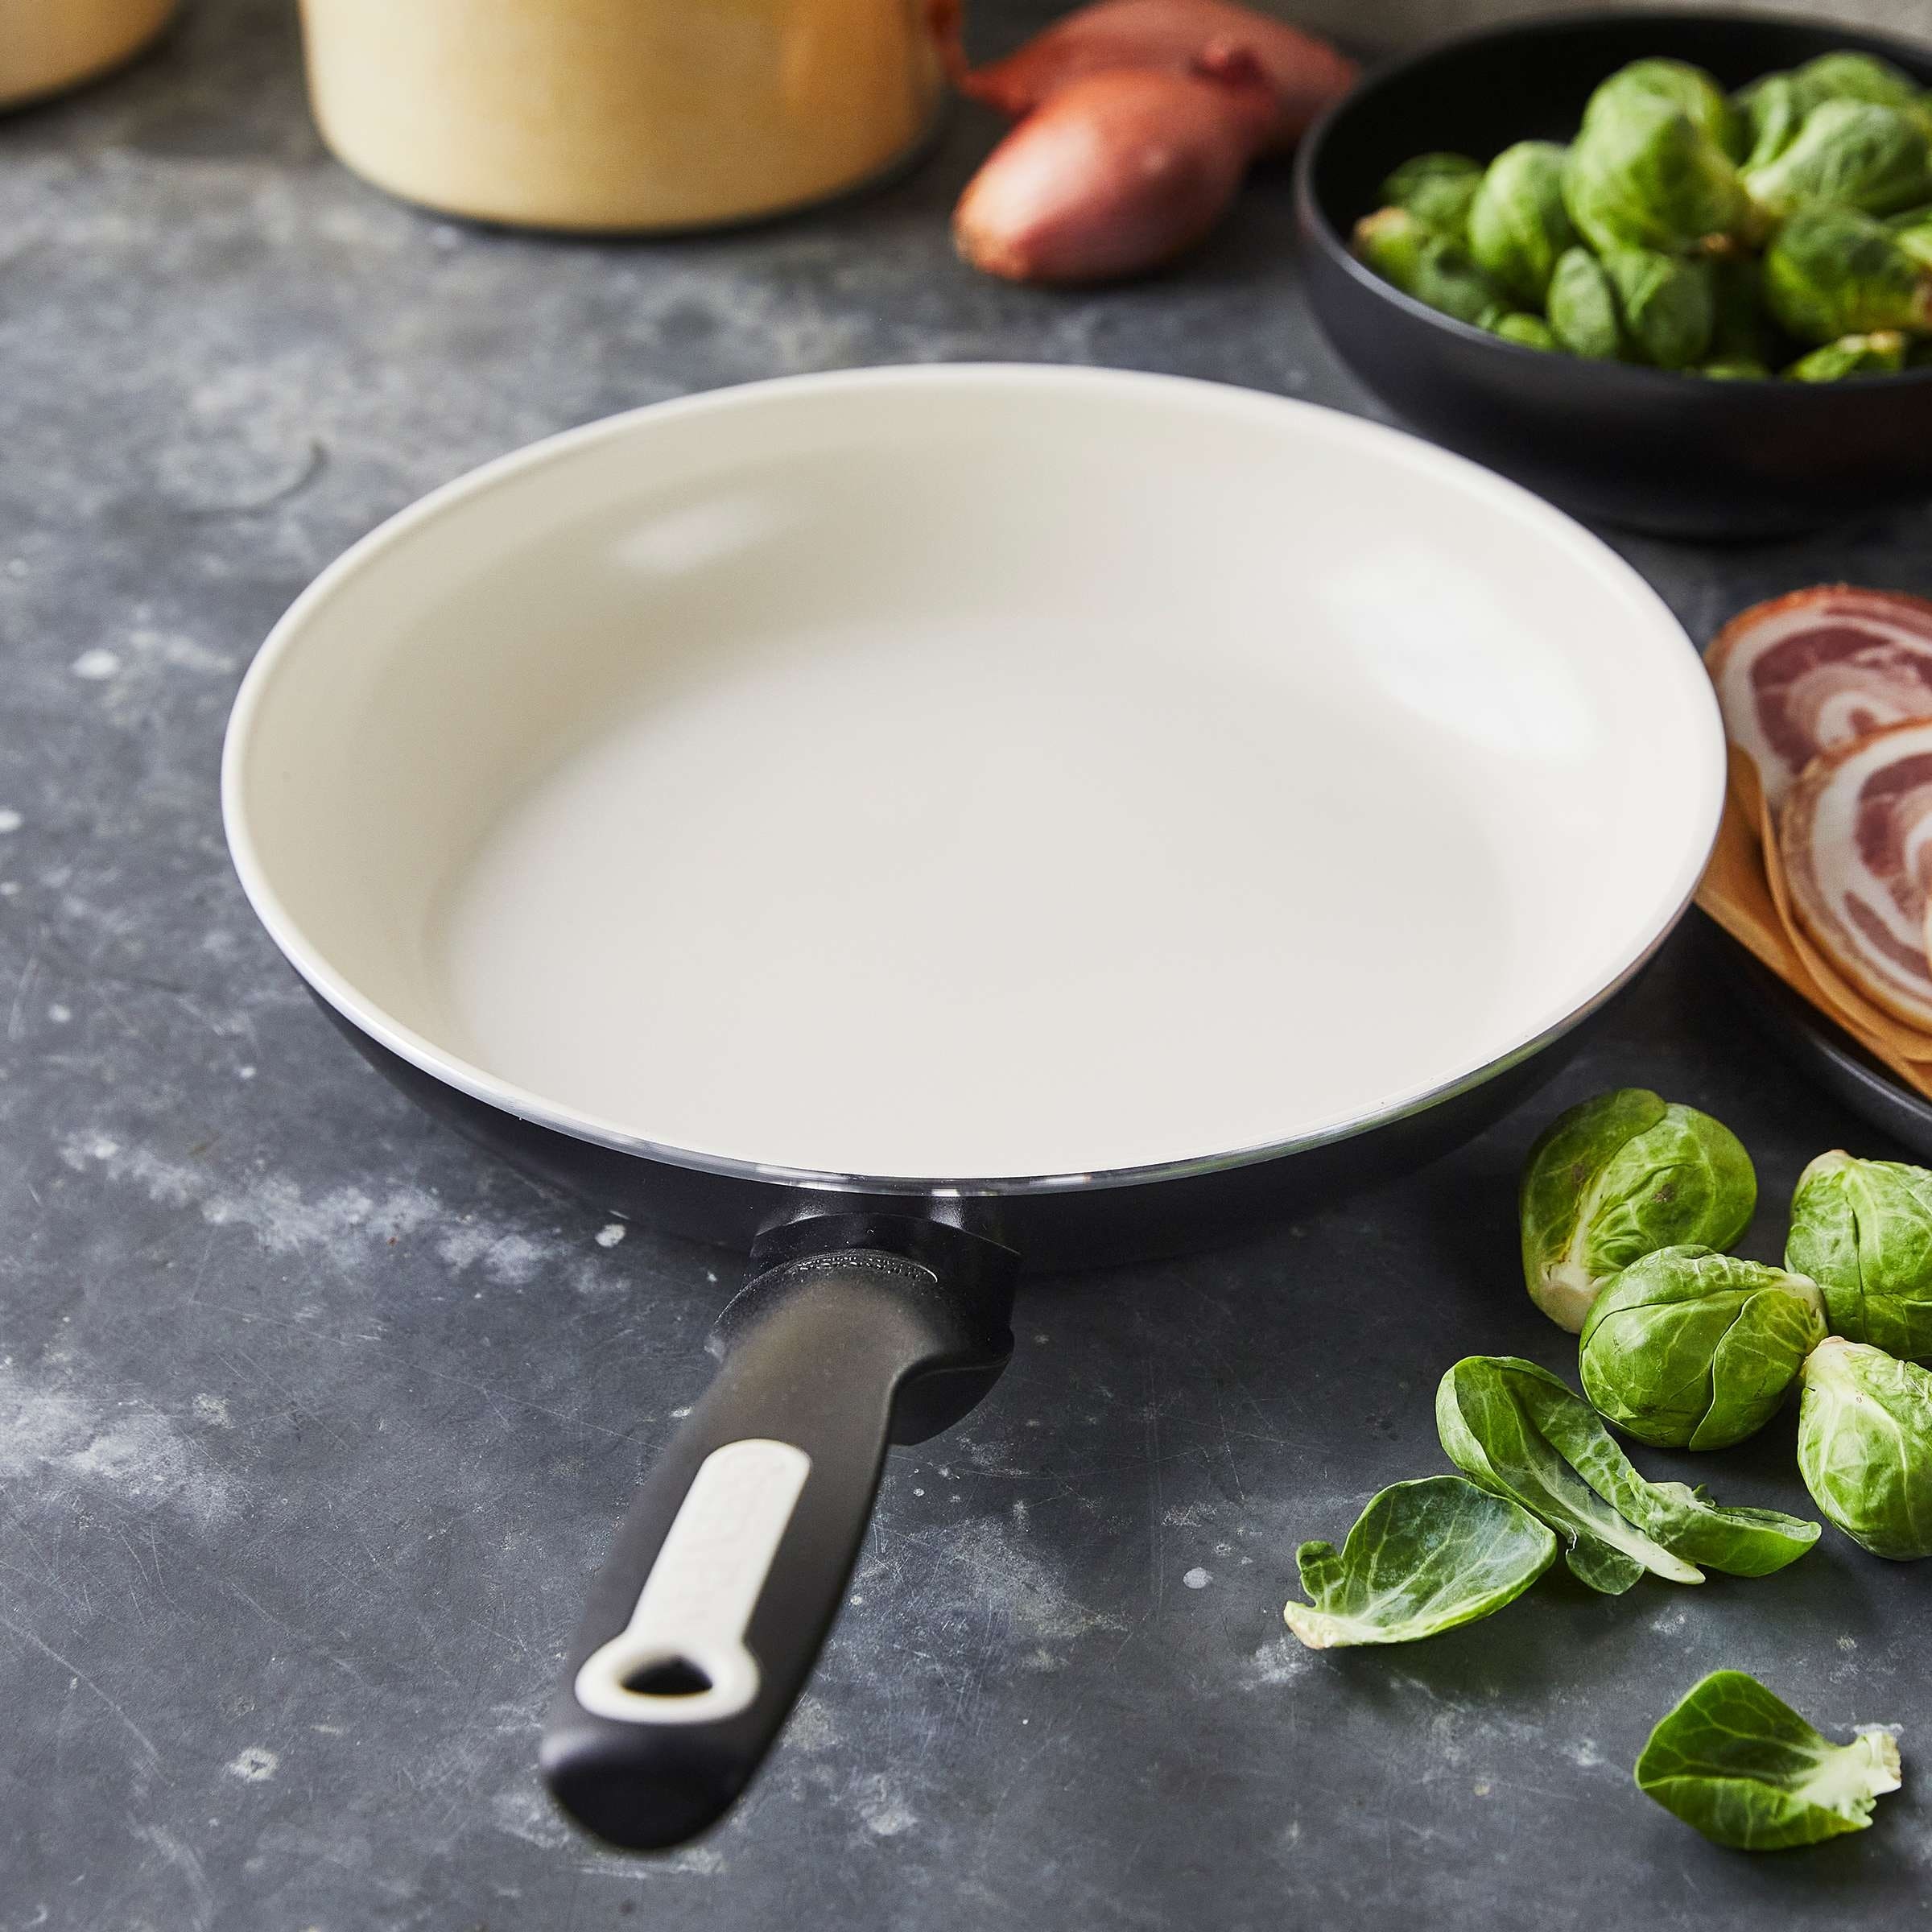 https://ak1.ostkcdn.com/images/products/is/images/direct/674a1b66b31620627af5b1a113f60415655302a8/GreenPan-Rio-10-inch-Ceramic-Nonstick-Frypan%2C-Black.jpg